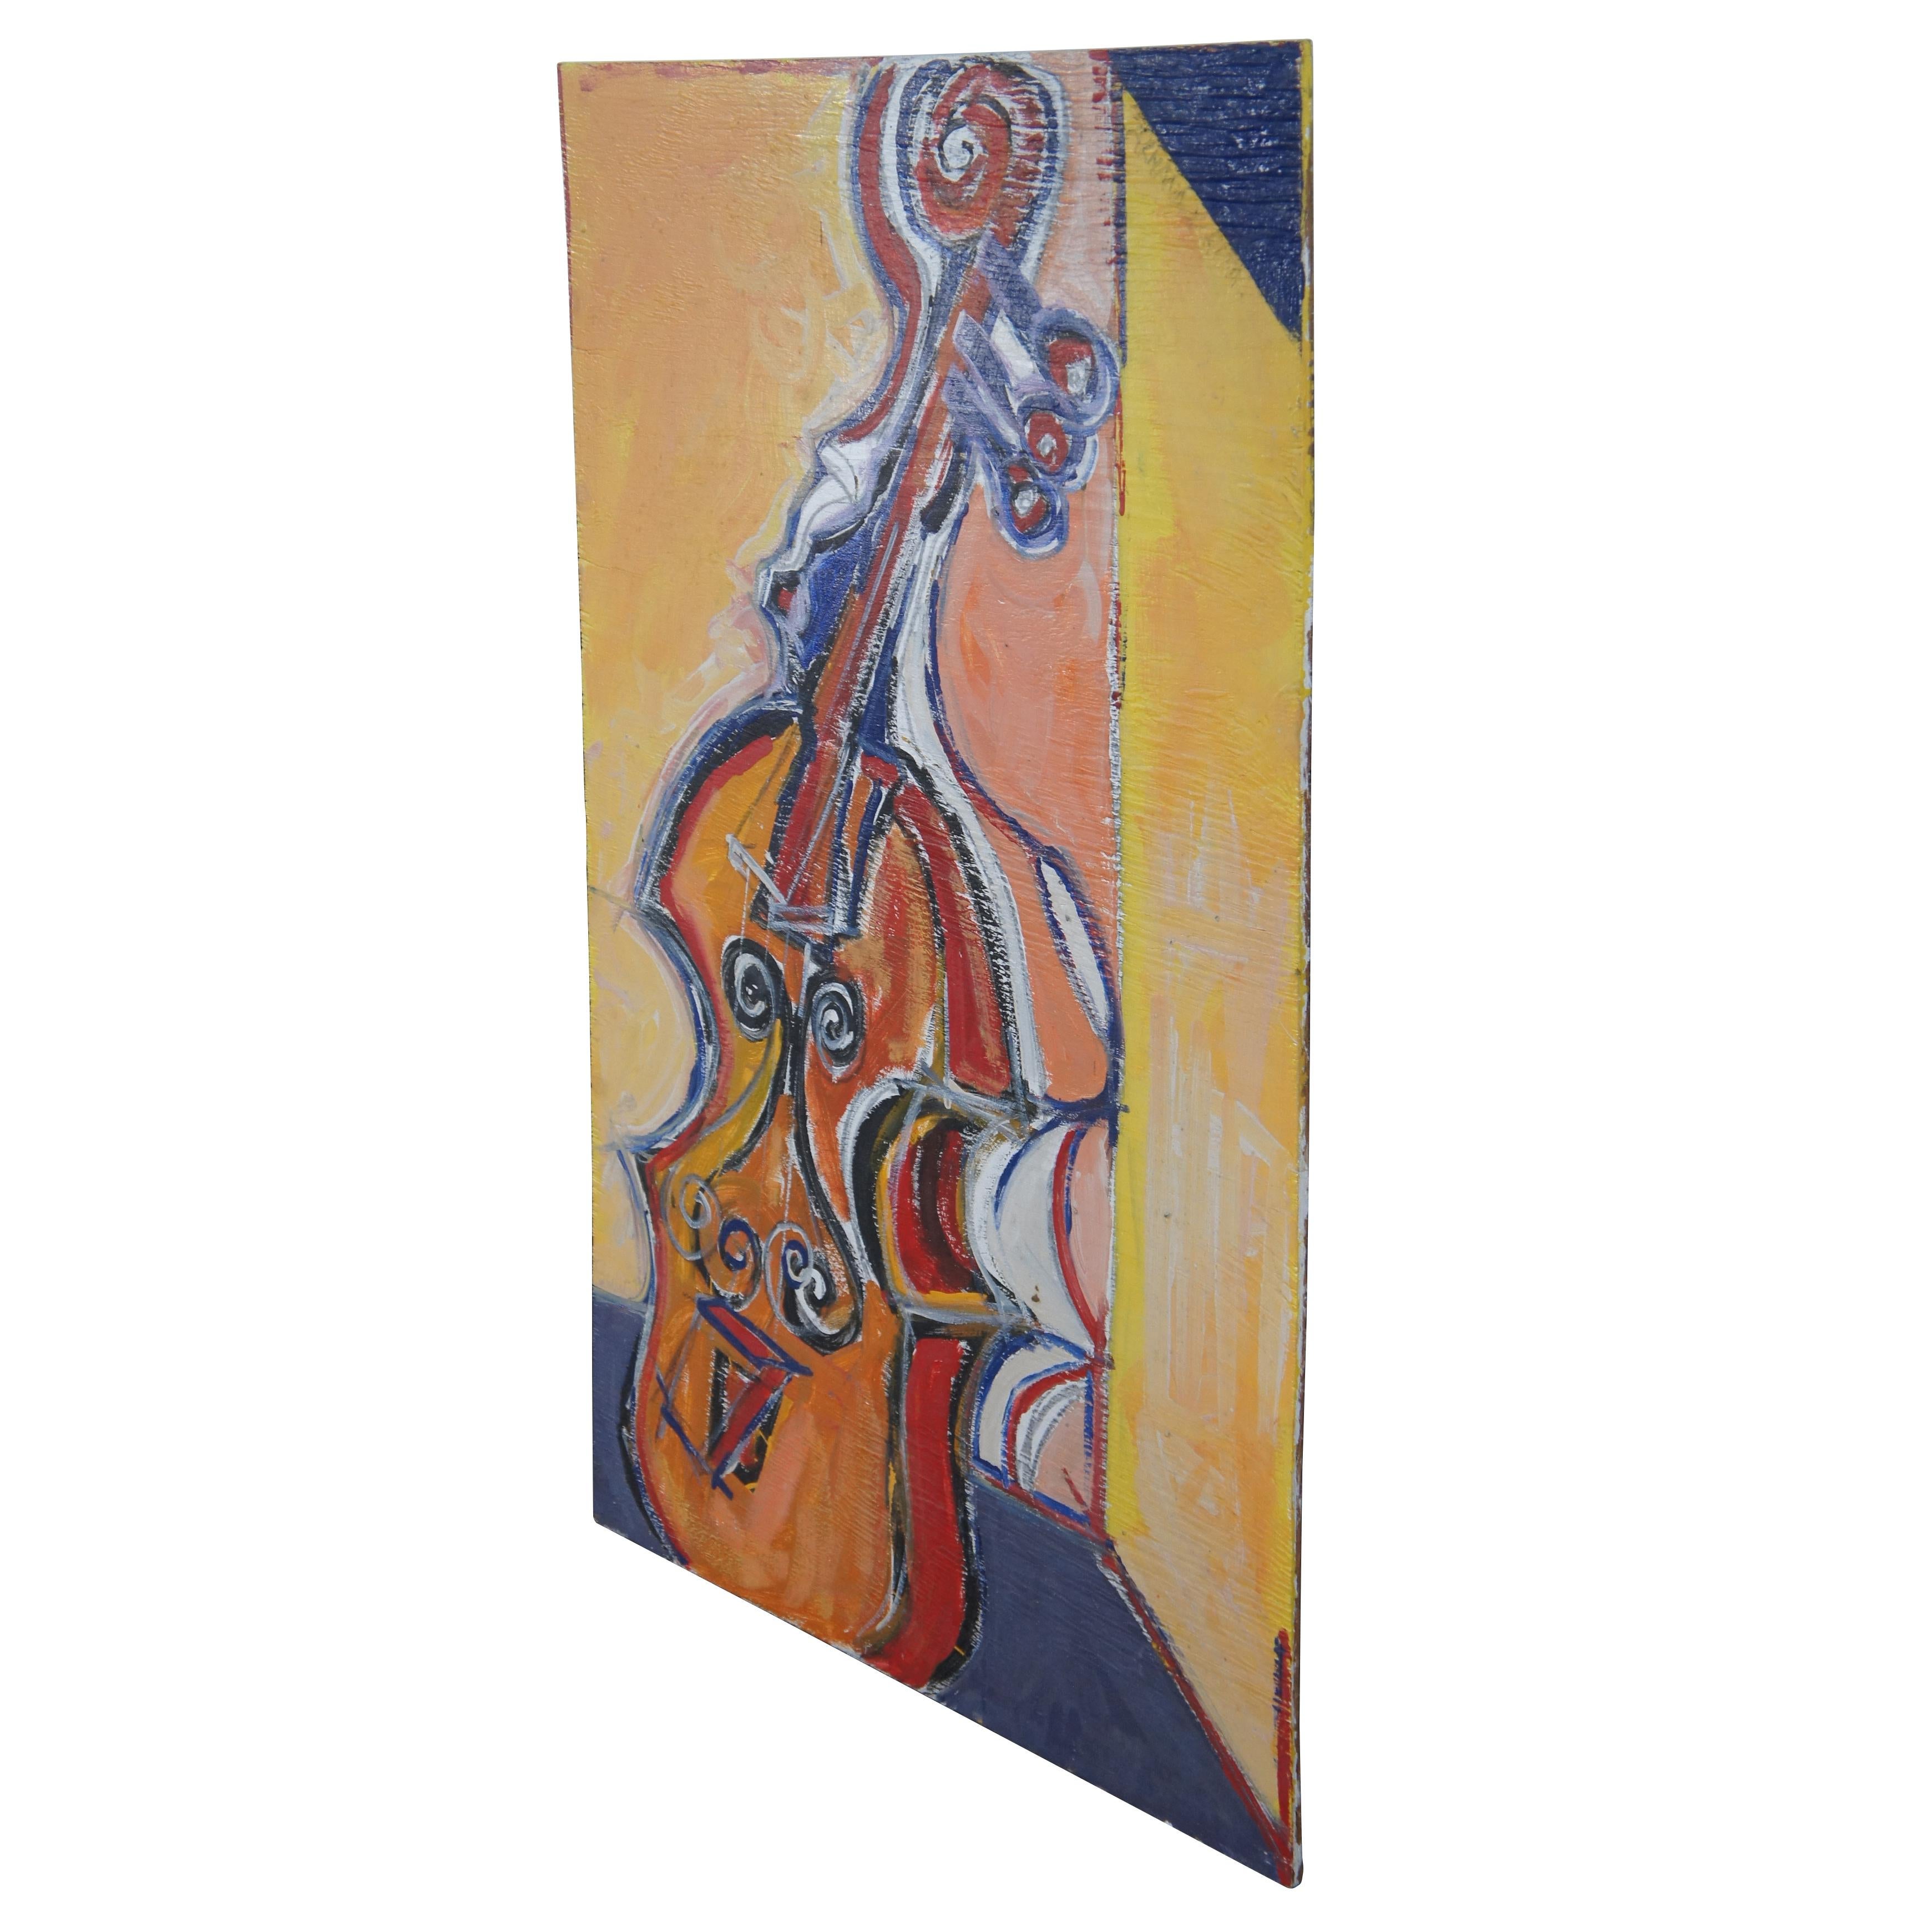 Vintage oil painting on board by Marc Berlet, featuring a colorful Cello. This piece was given wedding gift by him to his dear friends Armand and Rita, circa 1994.

Berlet, born in Pont Chateau France, studied at the Ecole de Beaux Arts in Paris